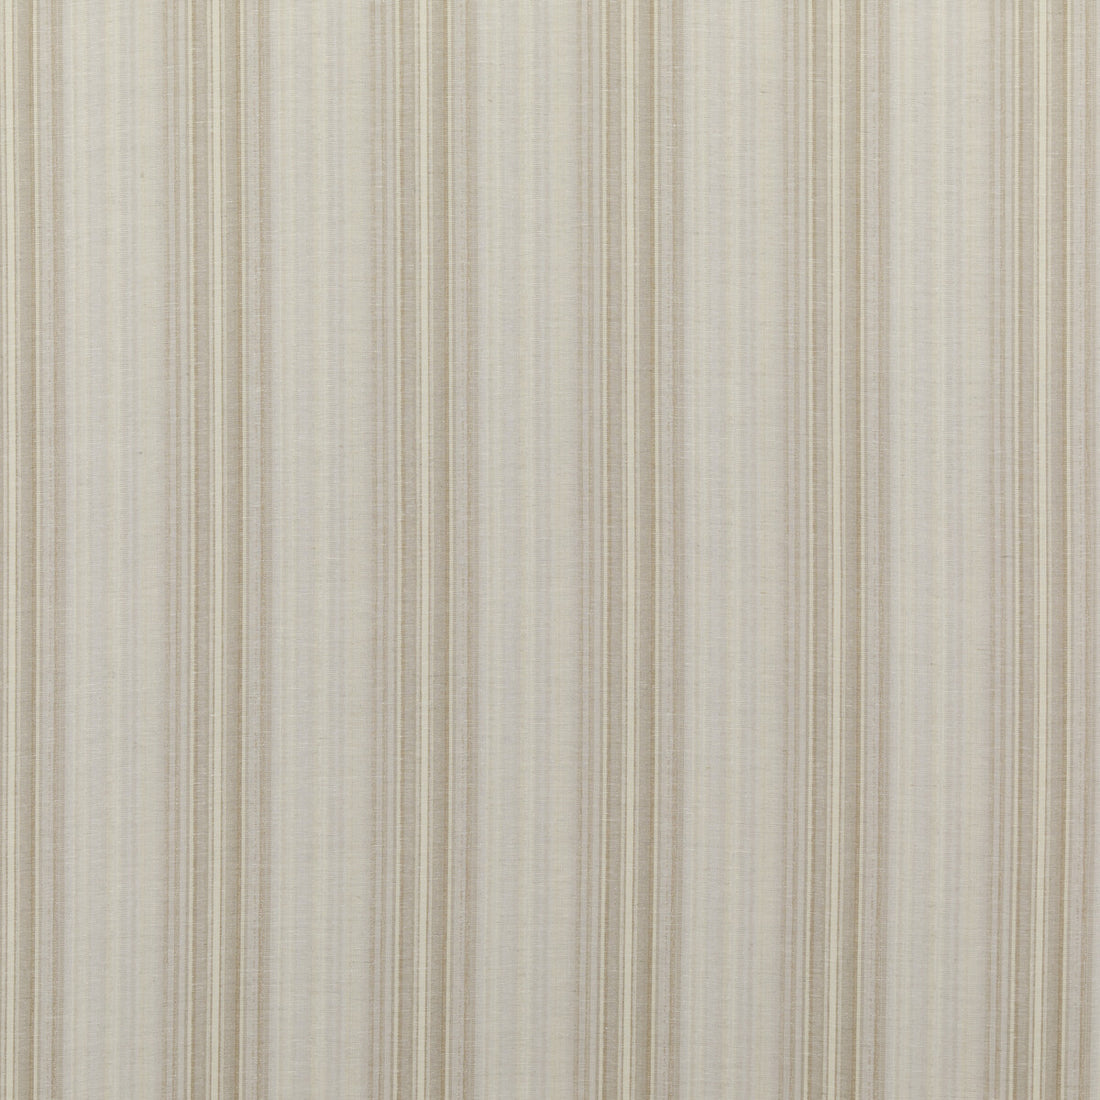 Claremont fabric in ivory color - pattern FD776.J102.0 - by Mulberry in the Modern Country collection